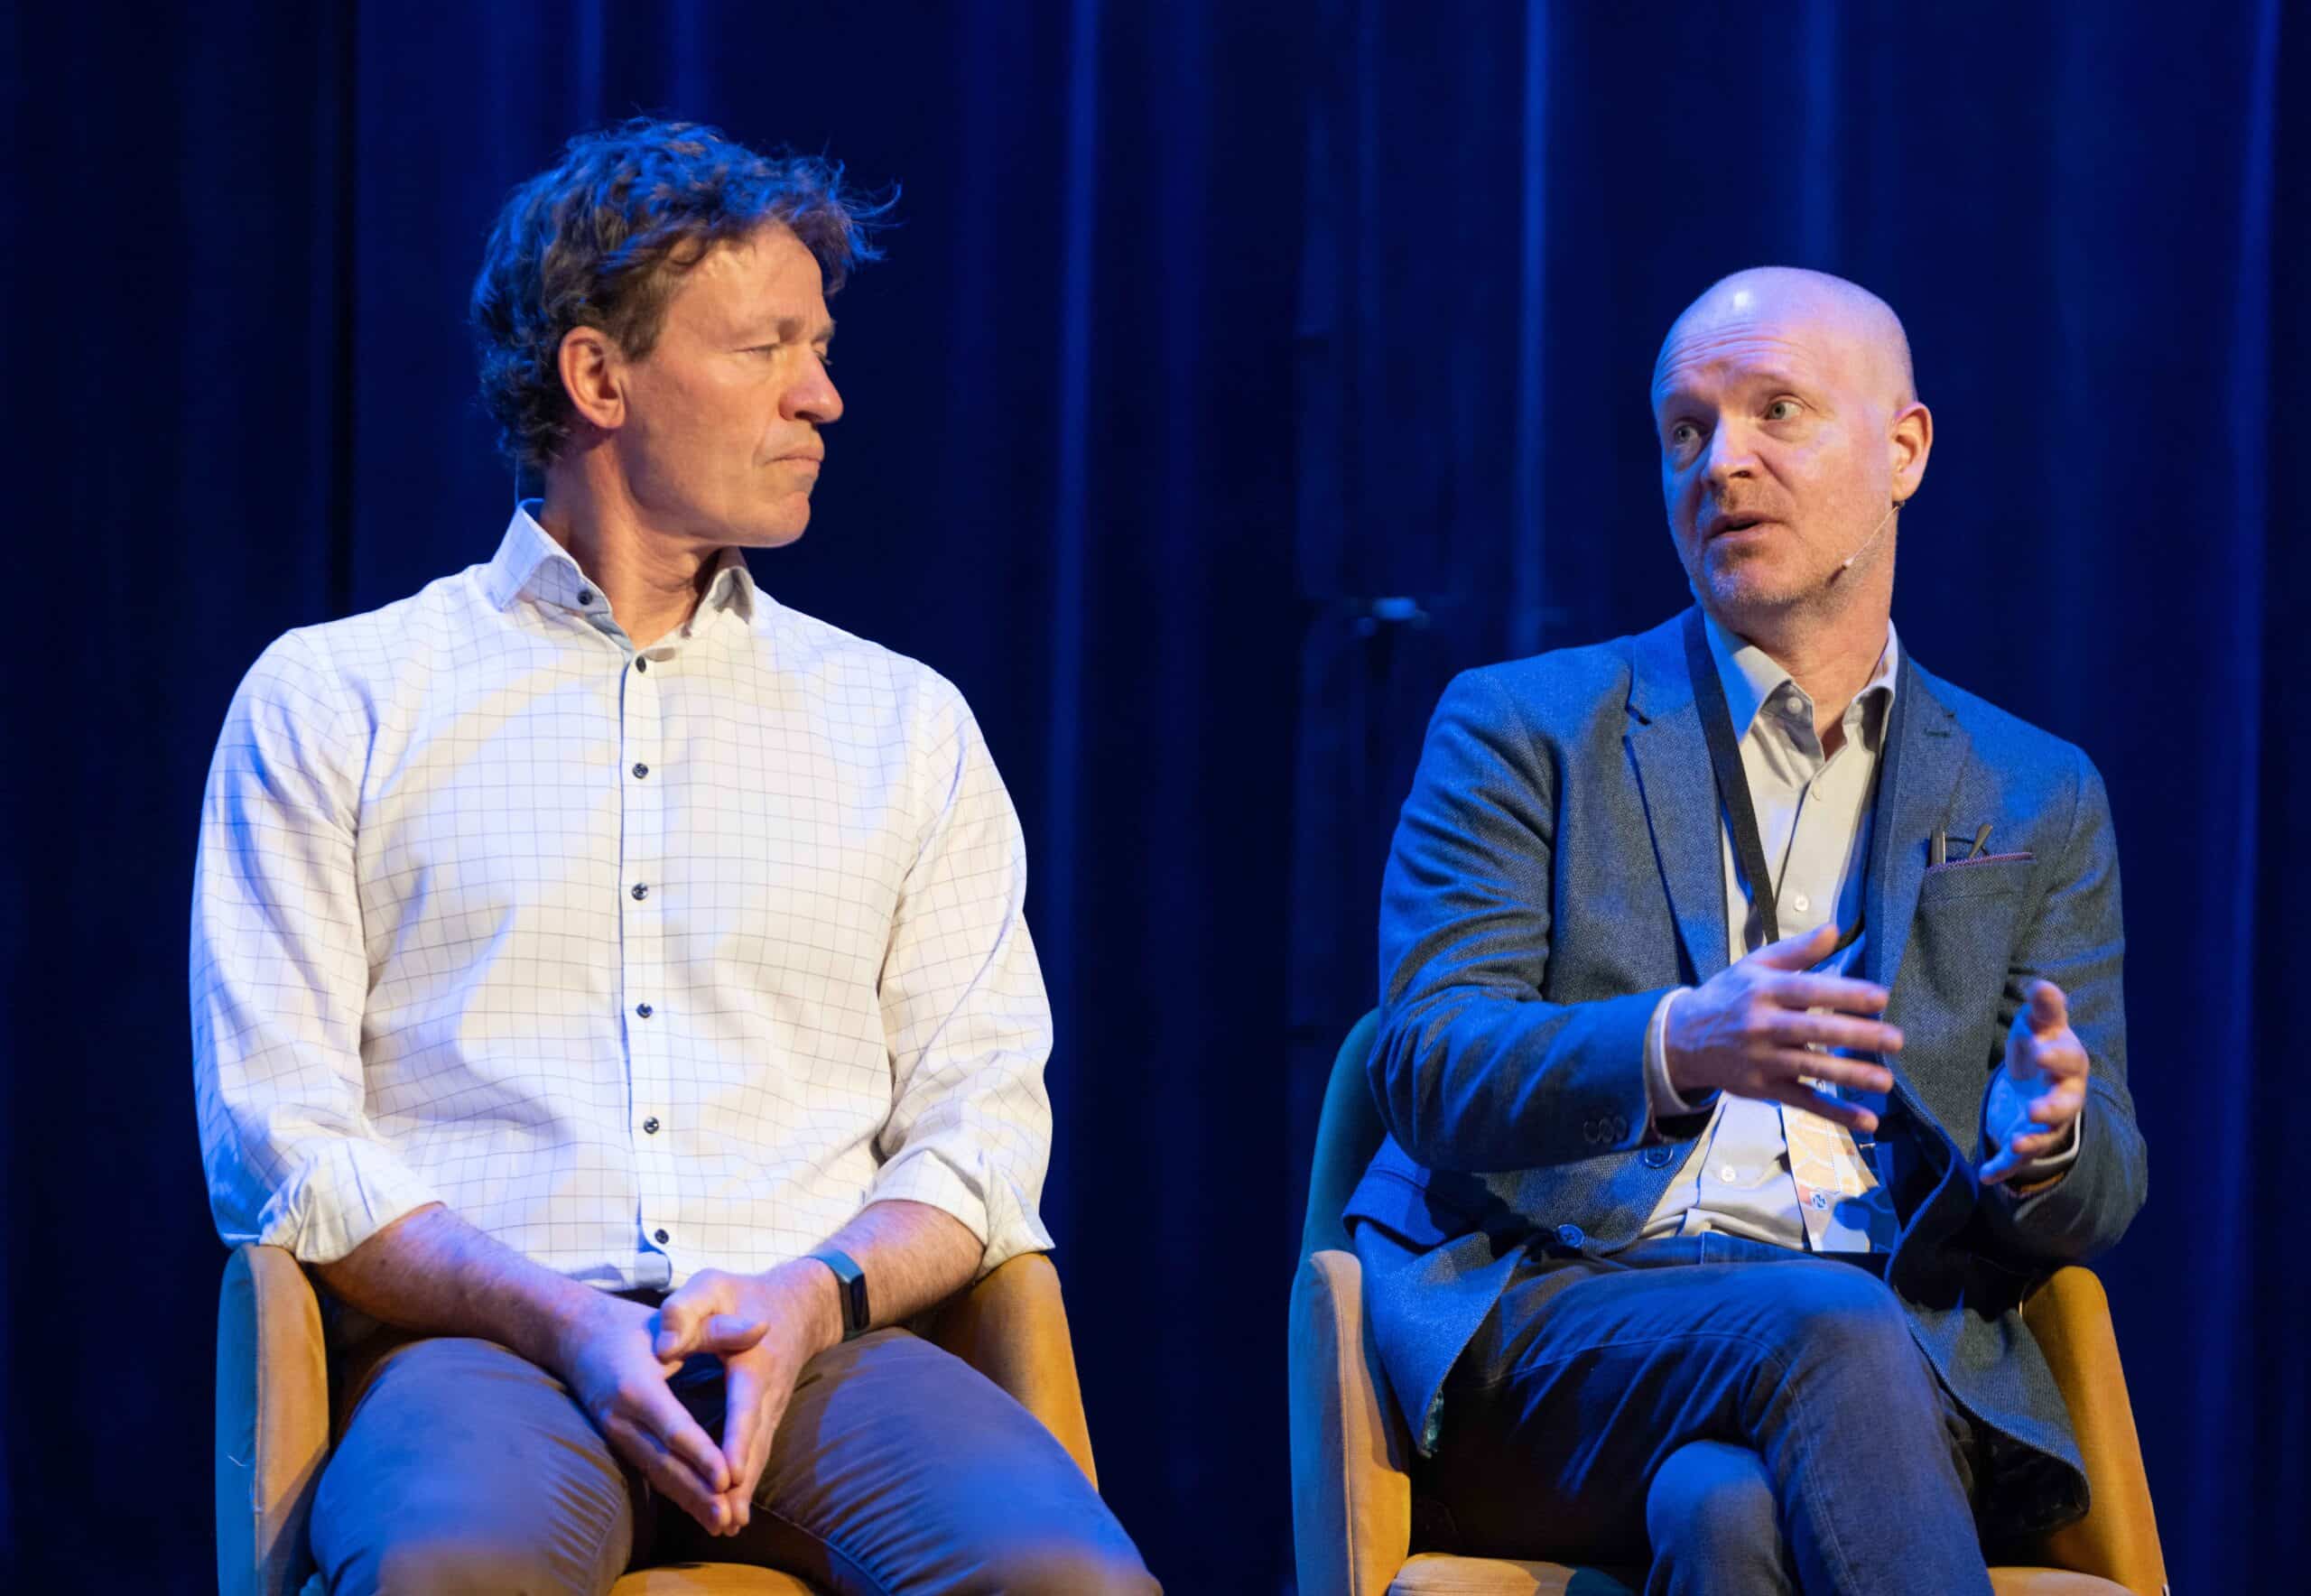 Trym Holter from Silo AI (left) and Jon Jahren from Microsoft Norway. PHOTO: Stein Johnsen, Contentvideo.no